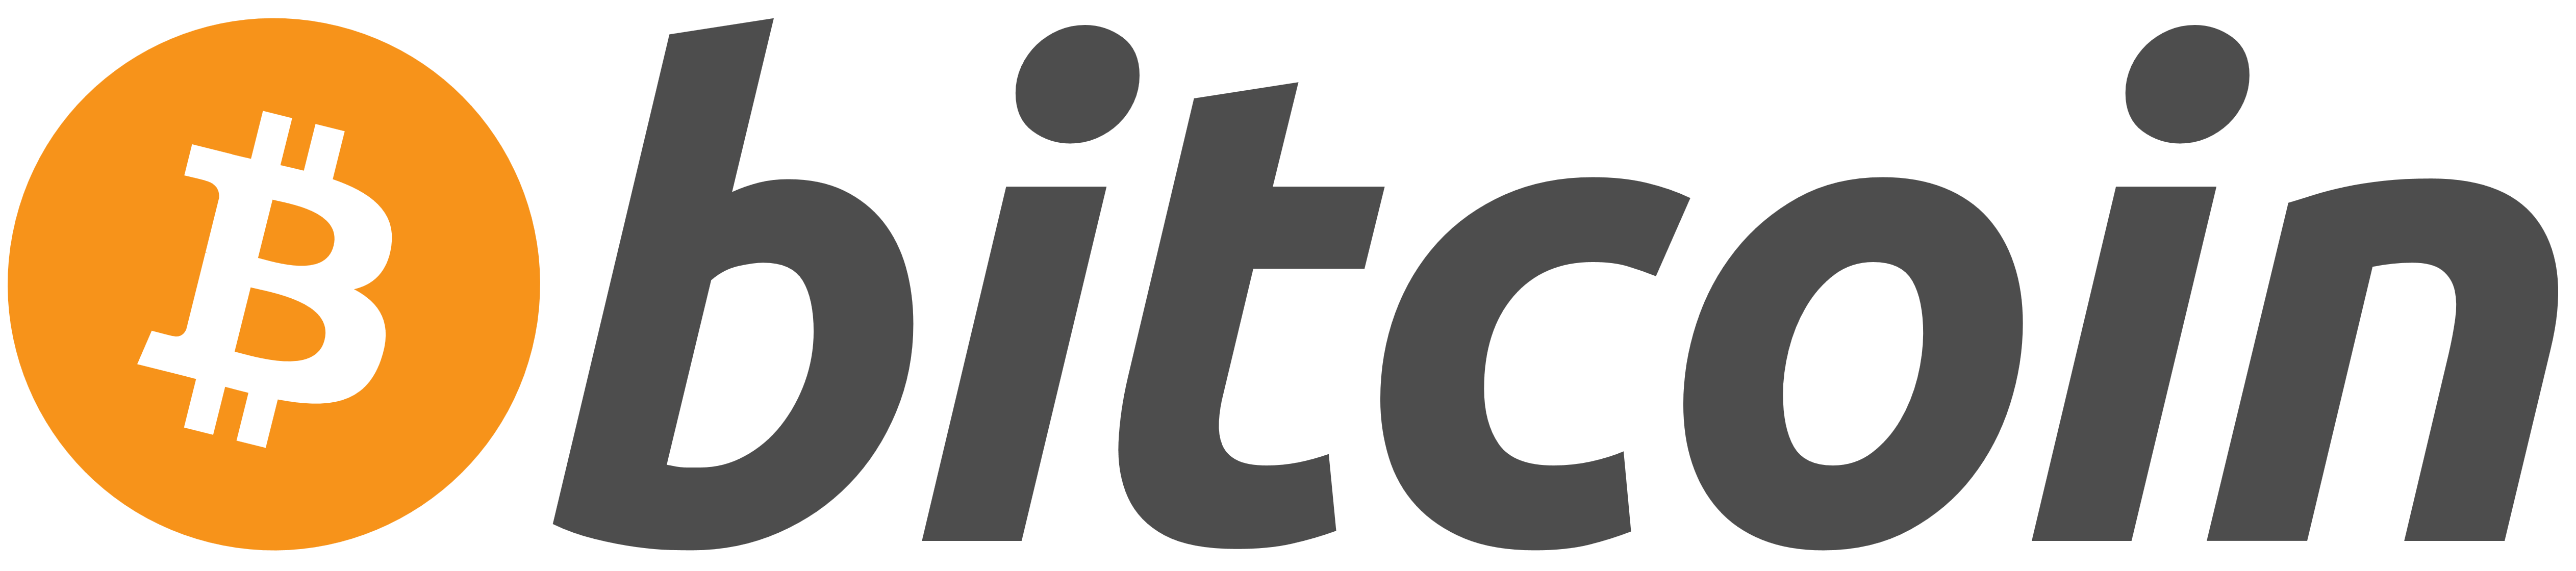 Bitcoin_logo_white_background.png